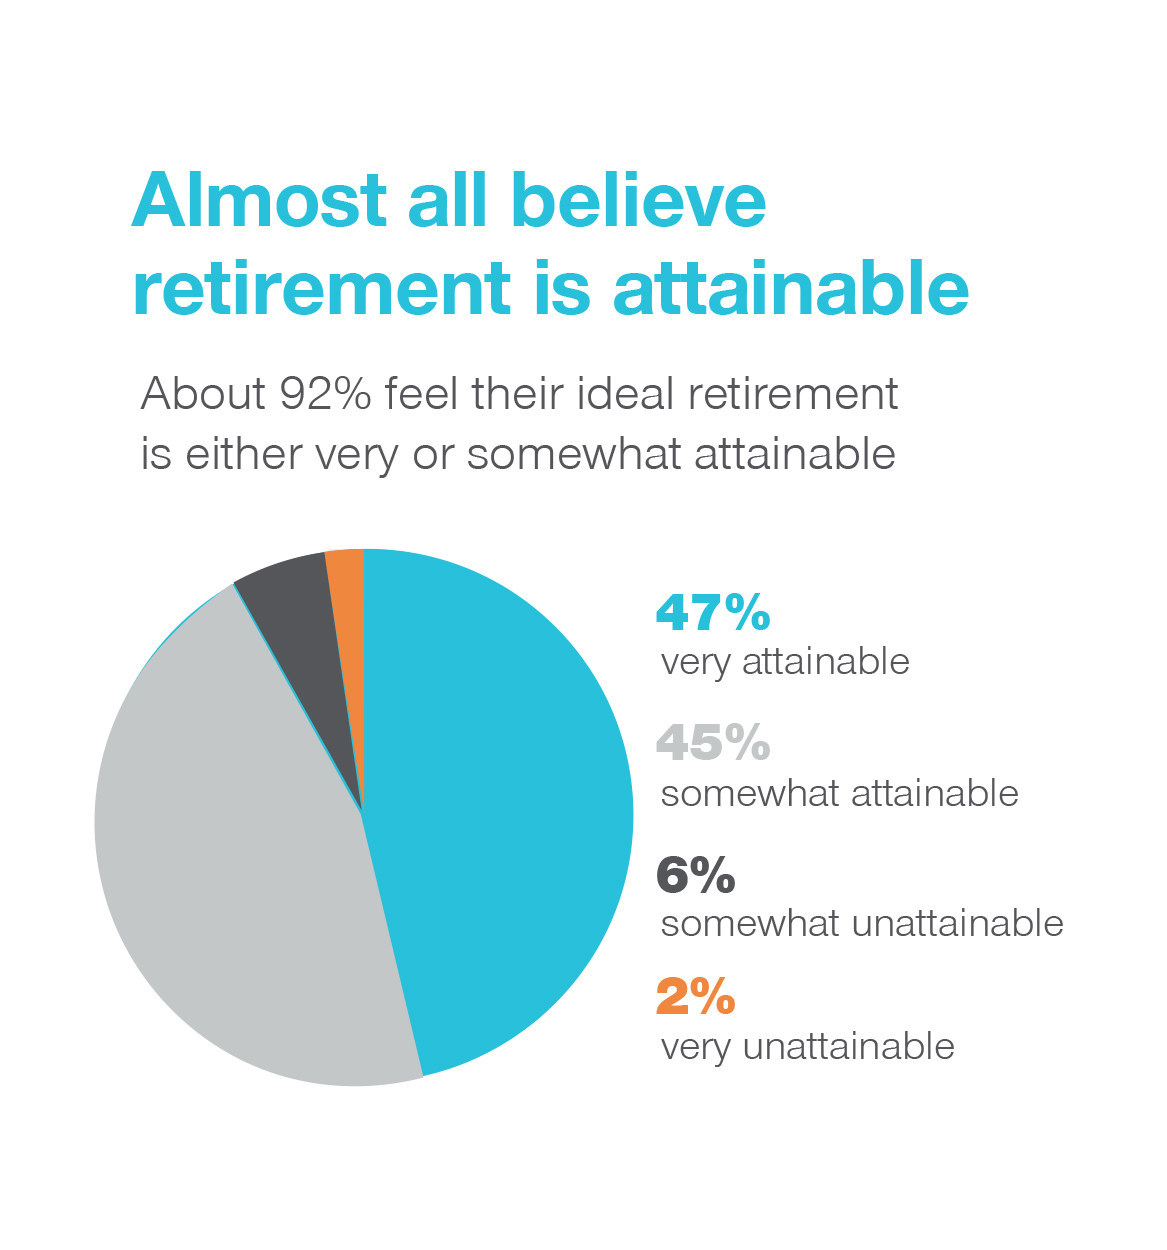 t-rowe-price-study-nearly-half-of-pre-retirees-feel-their-ideal